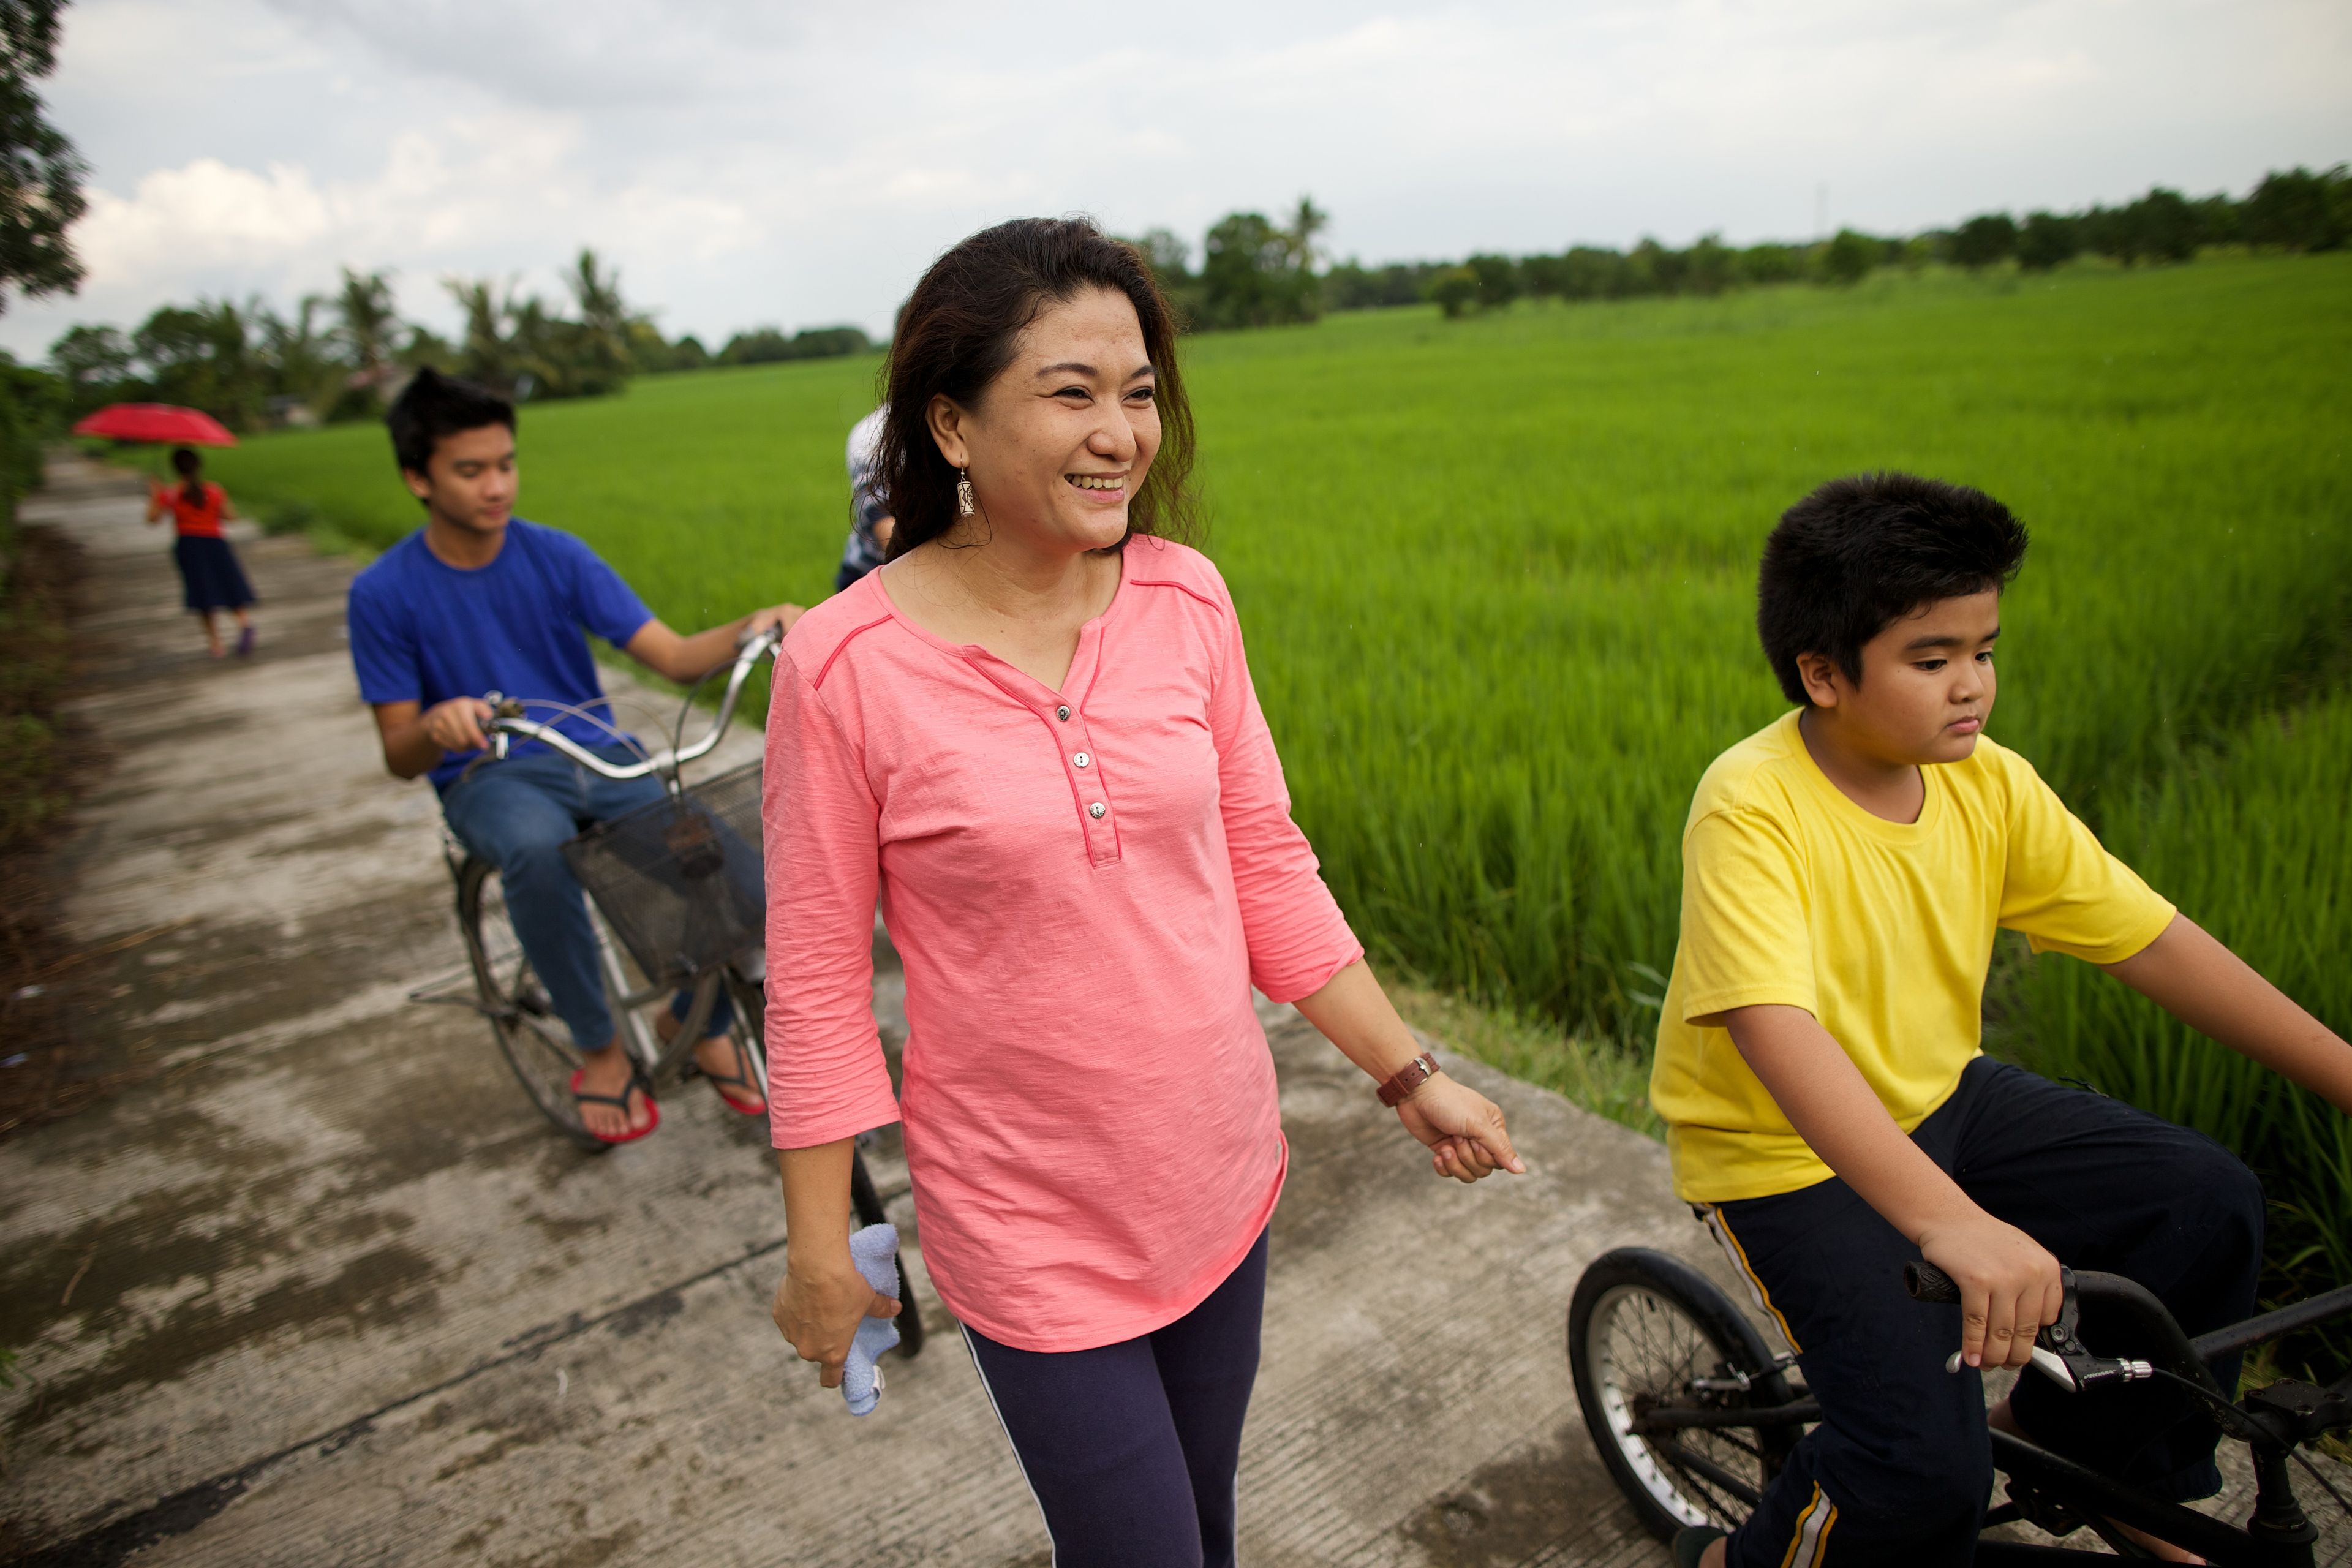 A mother walks next to her two sons, who are riding their bicycles.